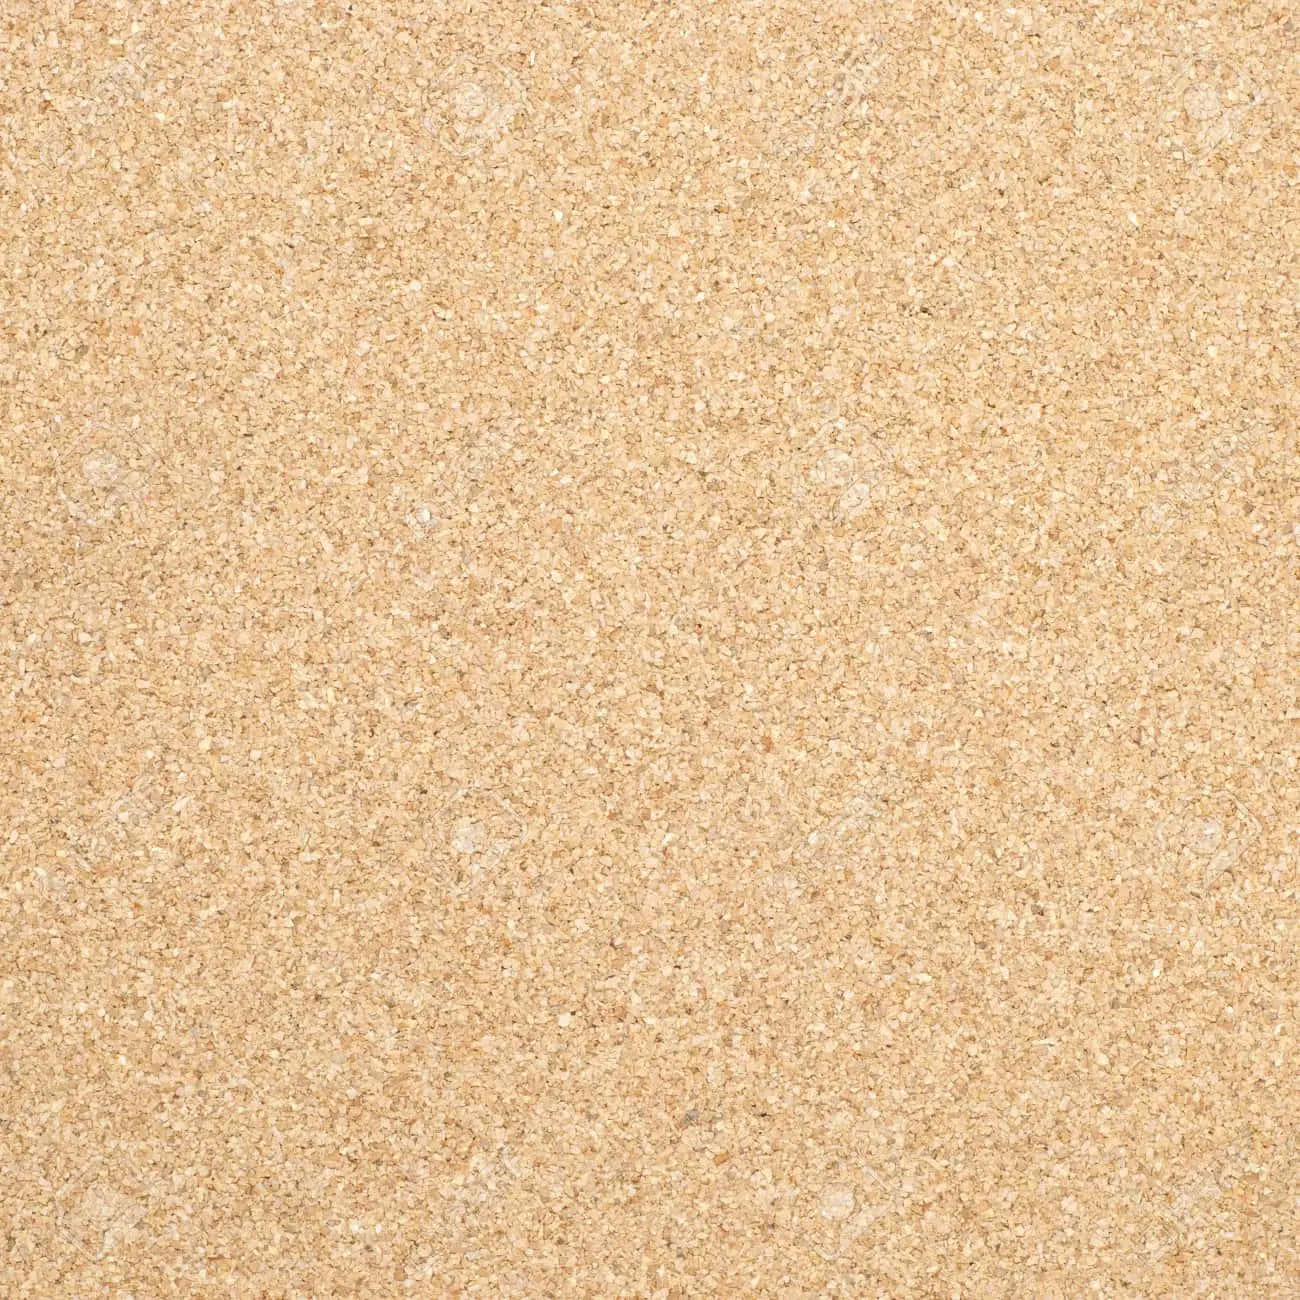 A Close Up Of A Brown Cork Board Background Stock Photo